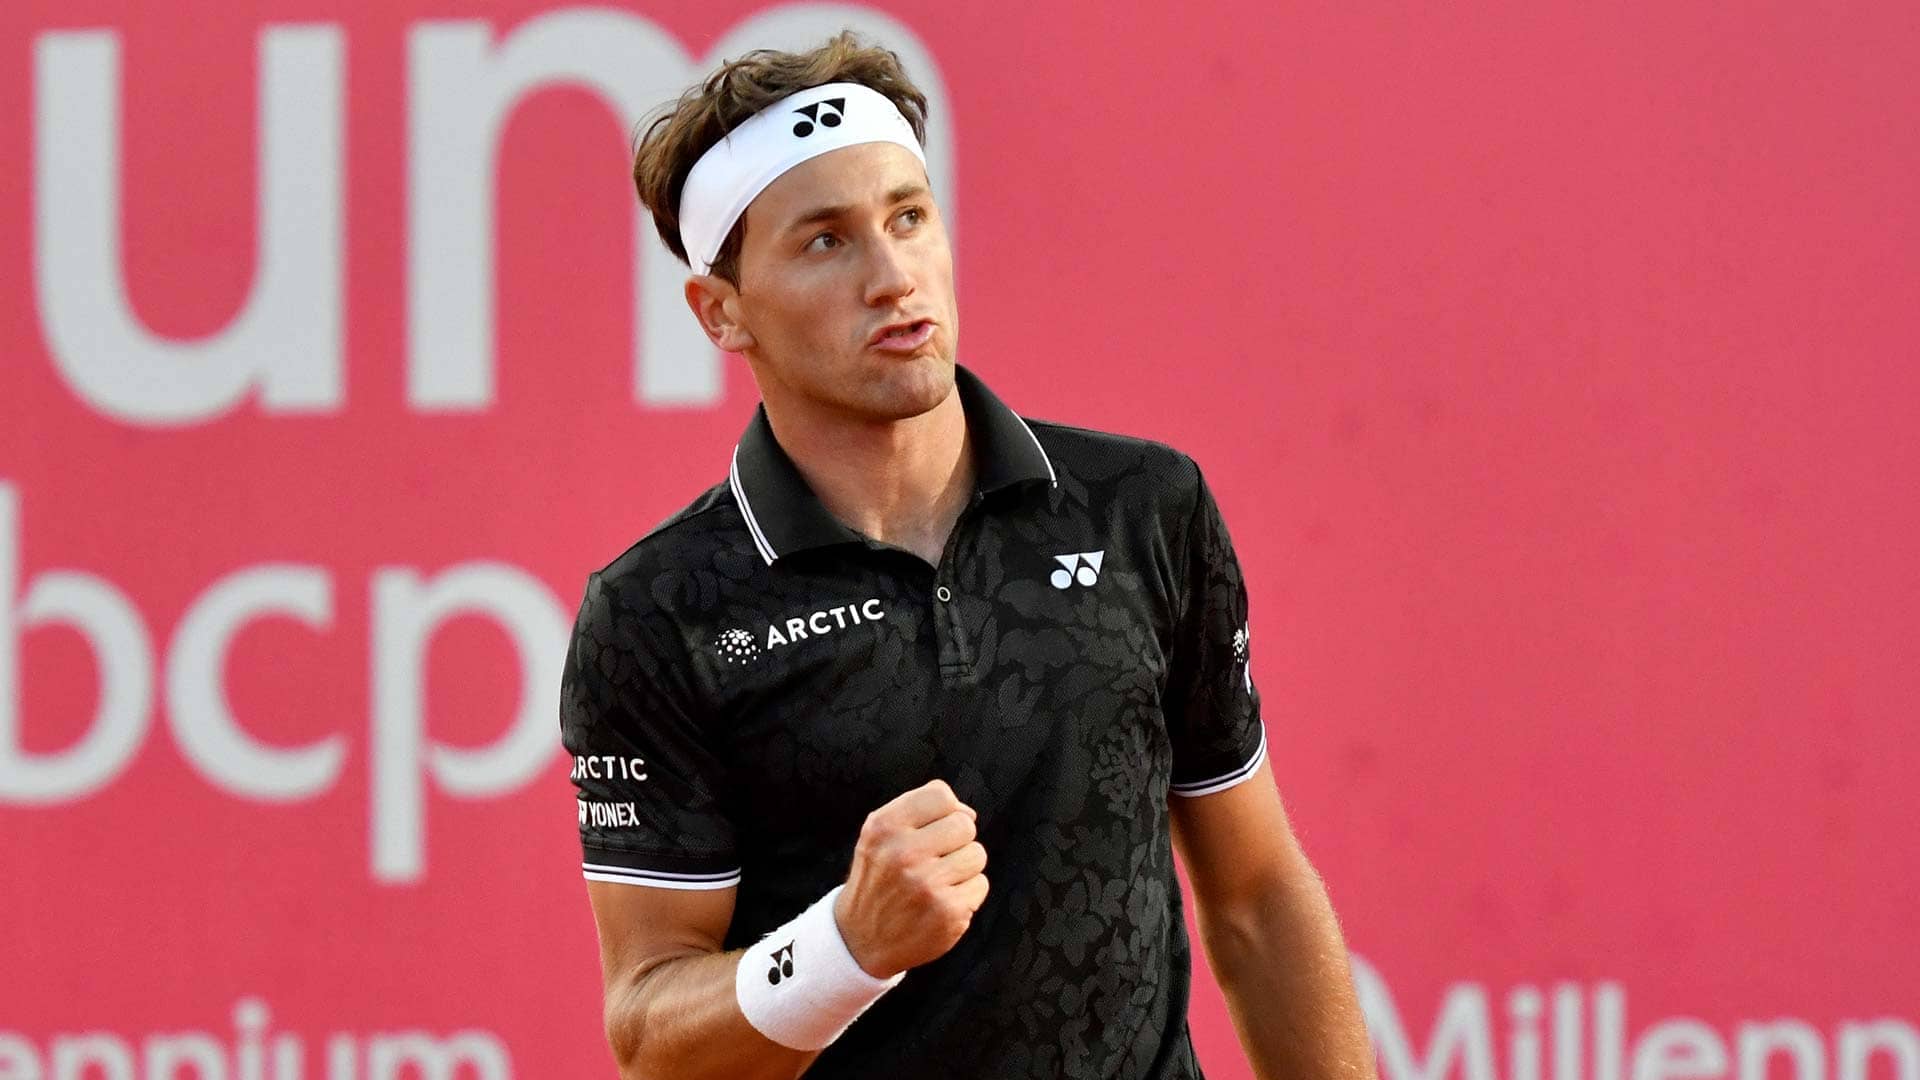 Casper Ruud earns his 100th tour-level win on clay on Wednesday in Estoril.